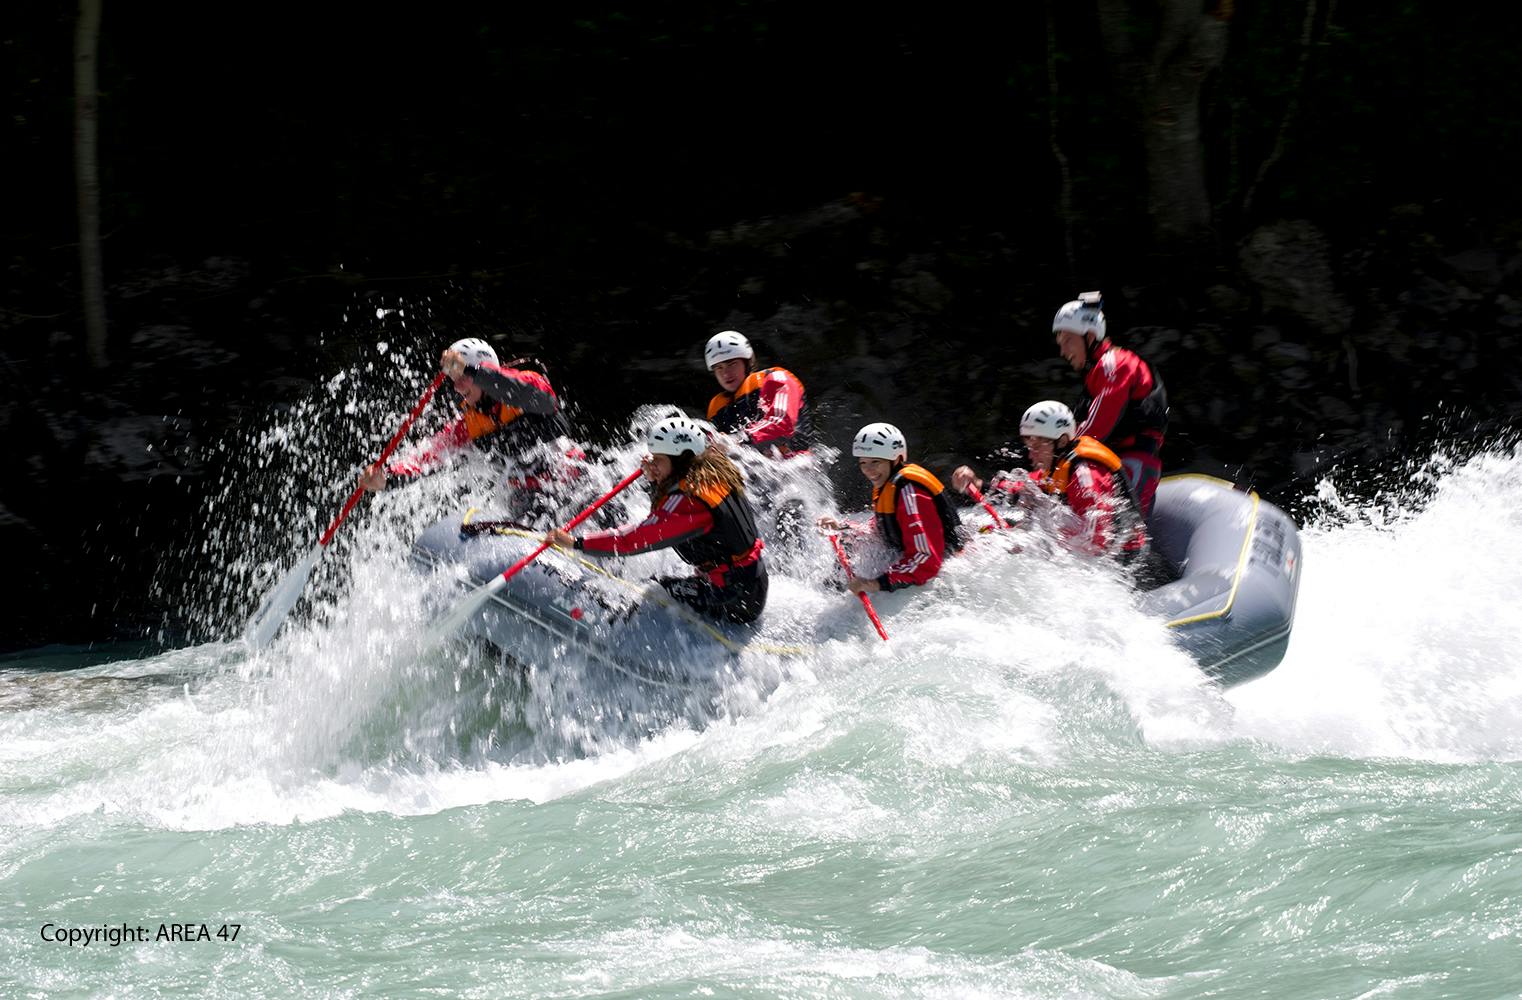 Action Trip | Rafting Imster Schlucht, Canyoning, Blobbing